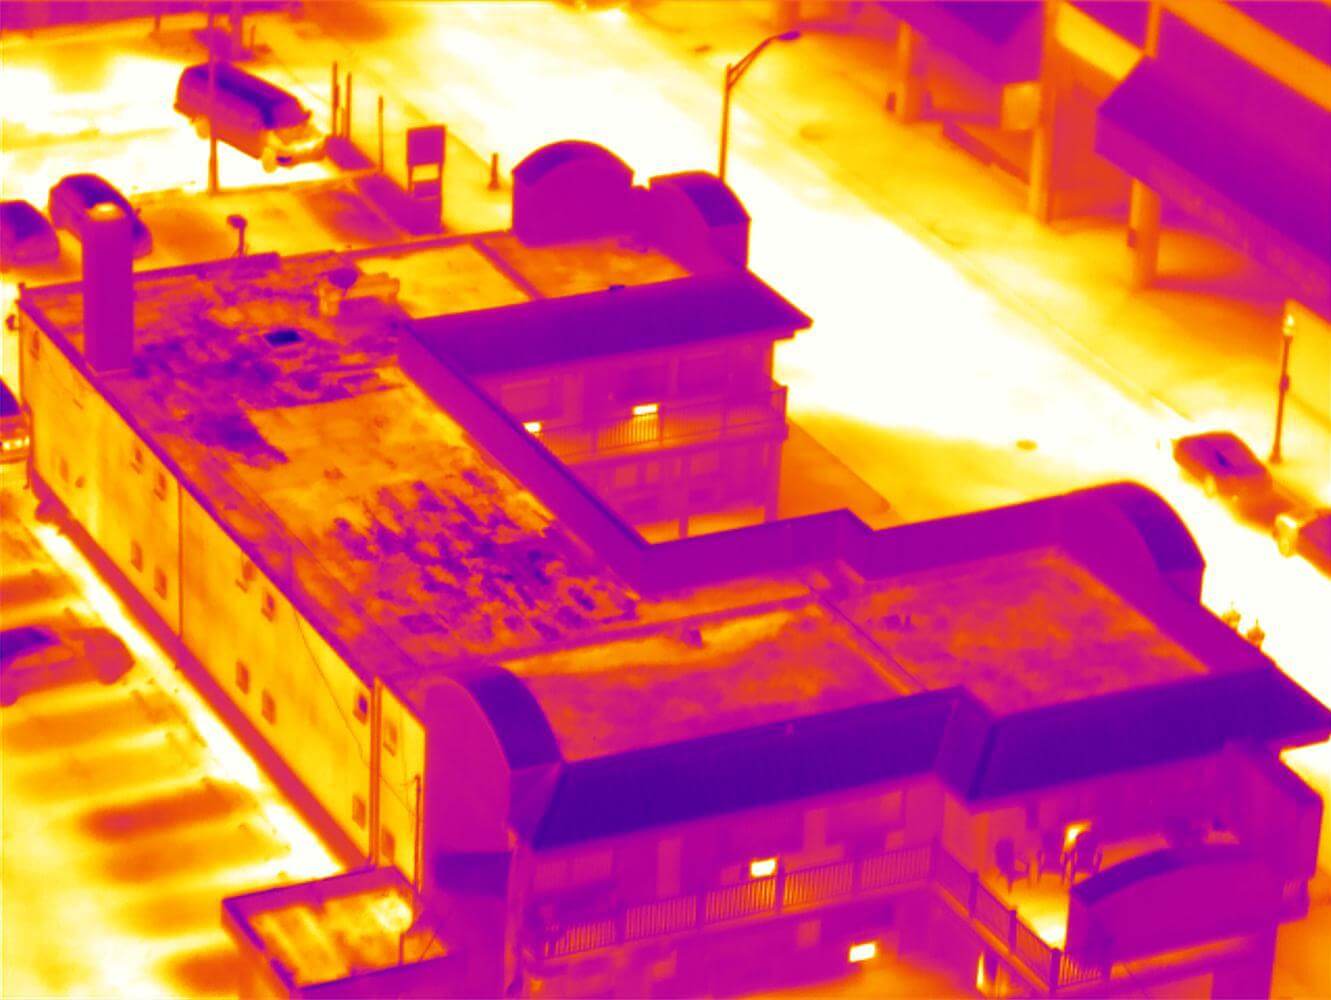 Commercial & Residential Infrared Moisture Survey/Inspections of Flat & Low Sloped Roofs in NJ